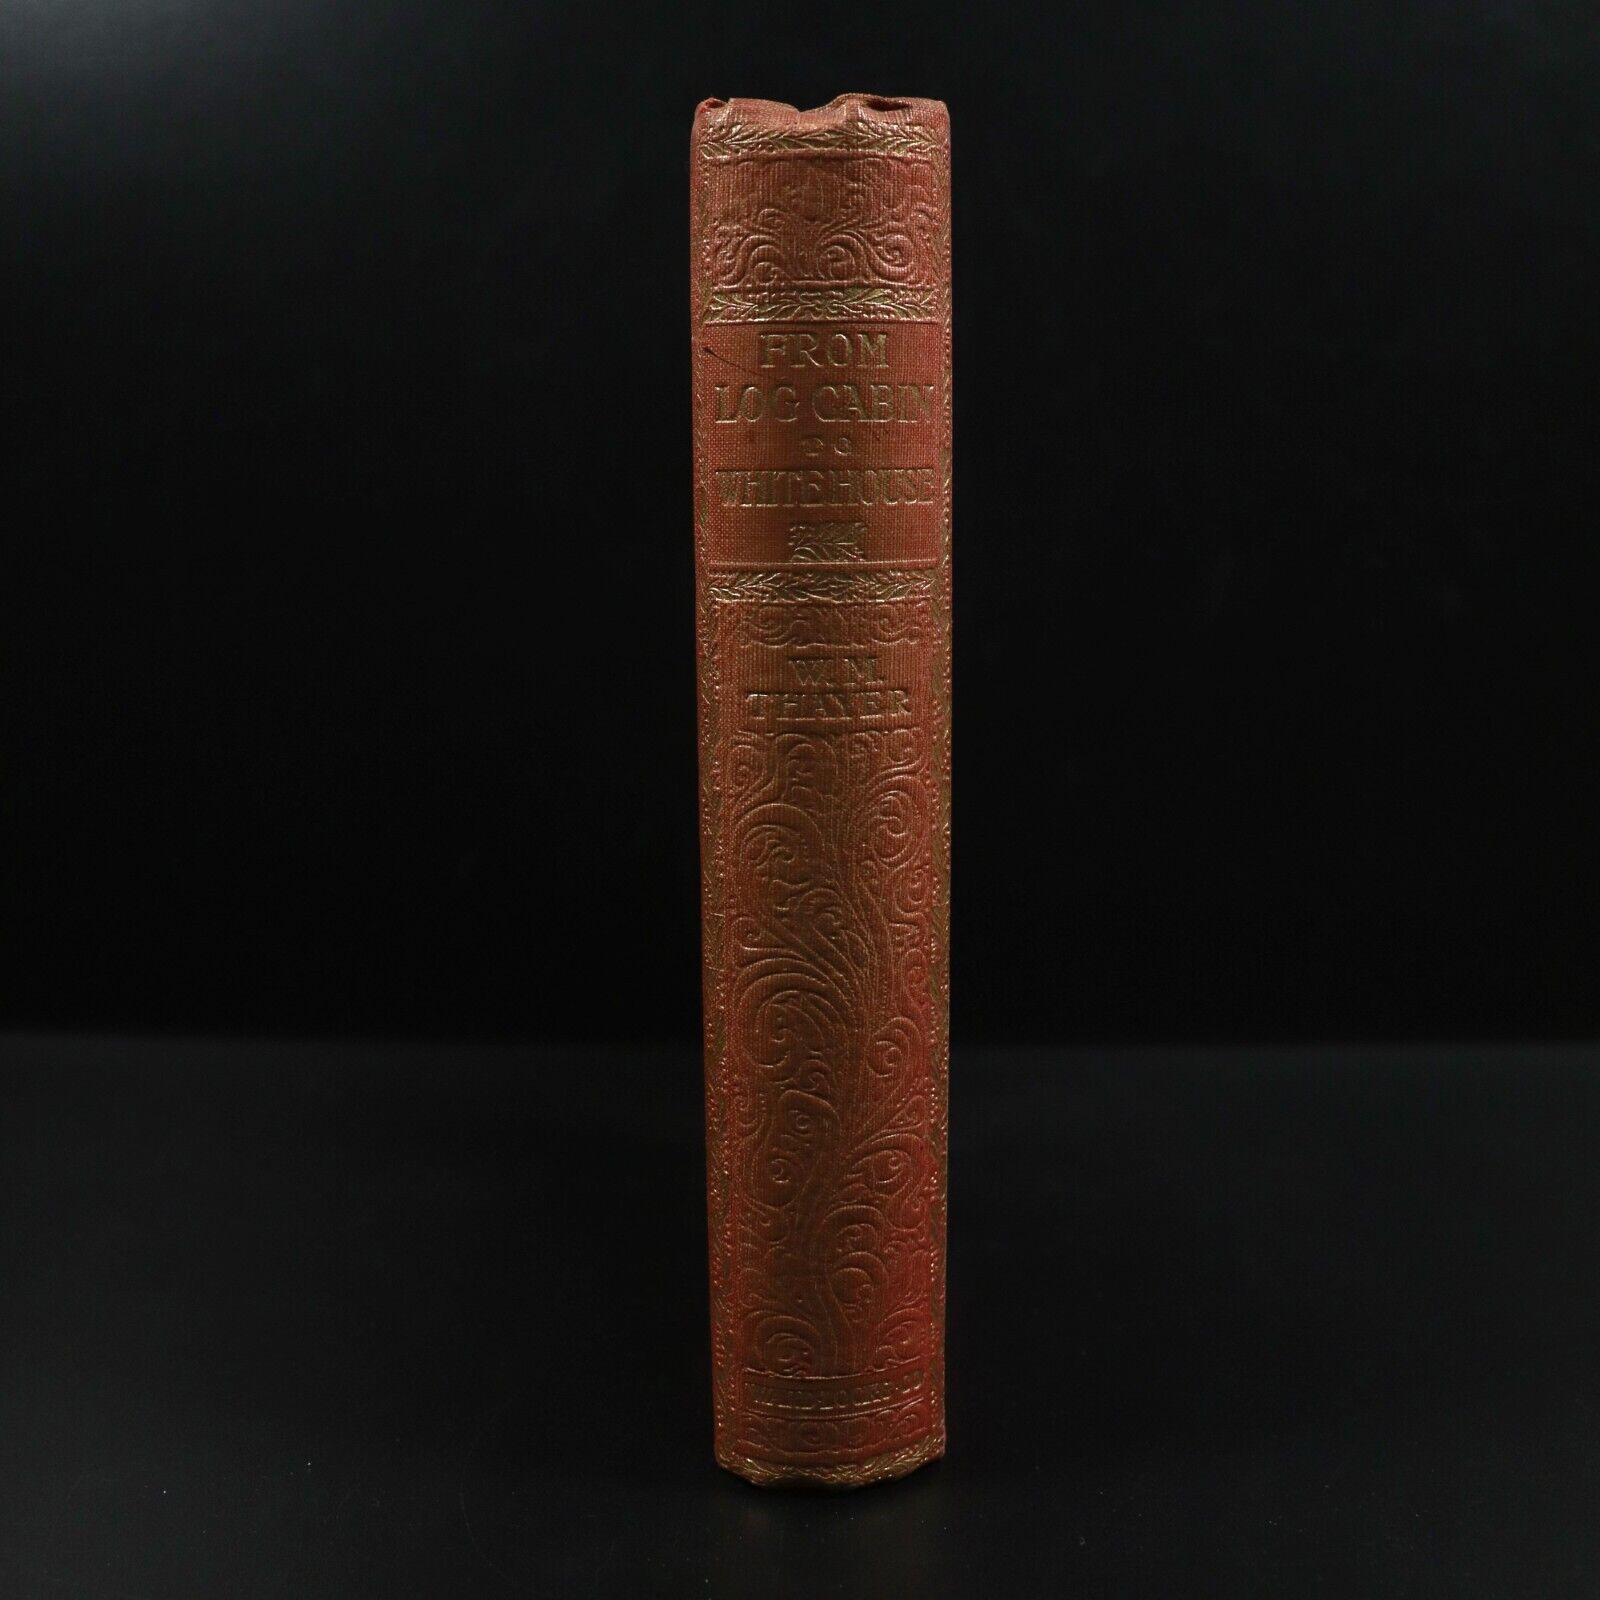 c1895 From Log Cabin To White House W.M. Thayer Antique American History Book